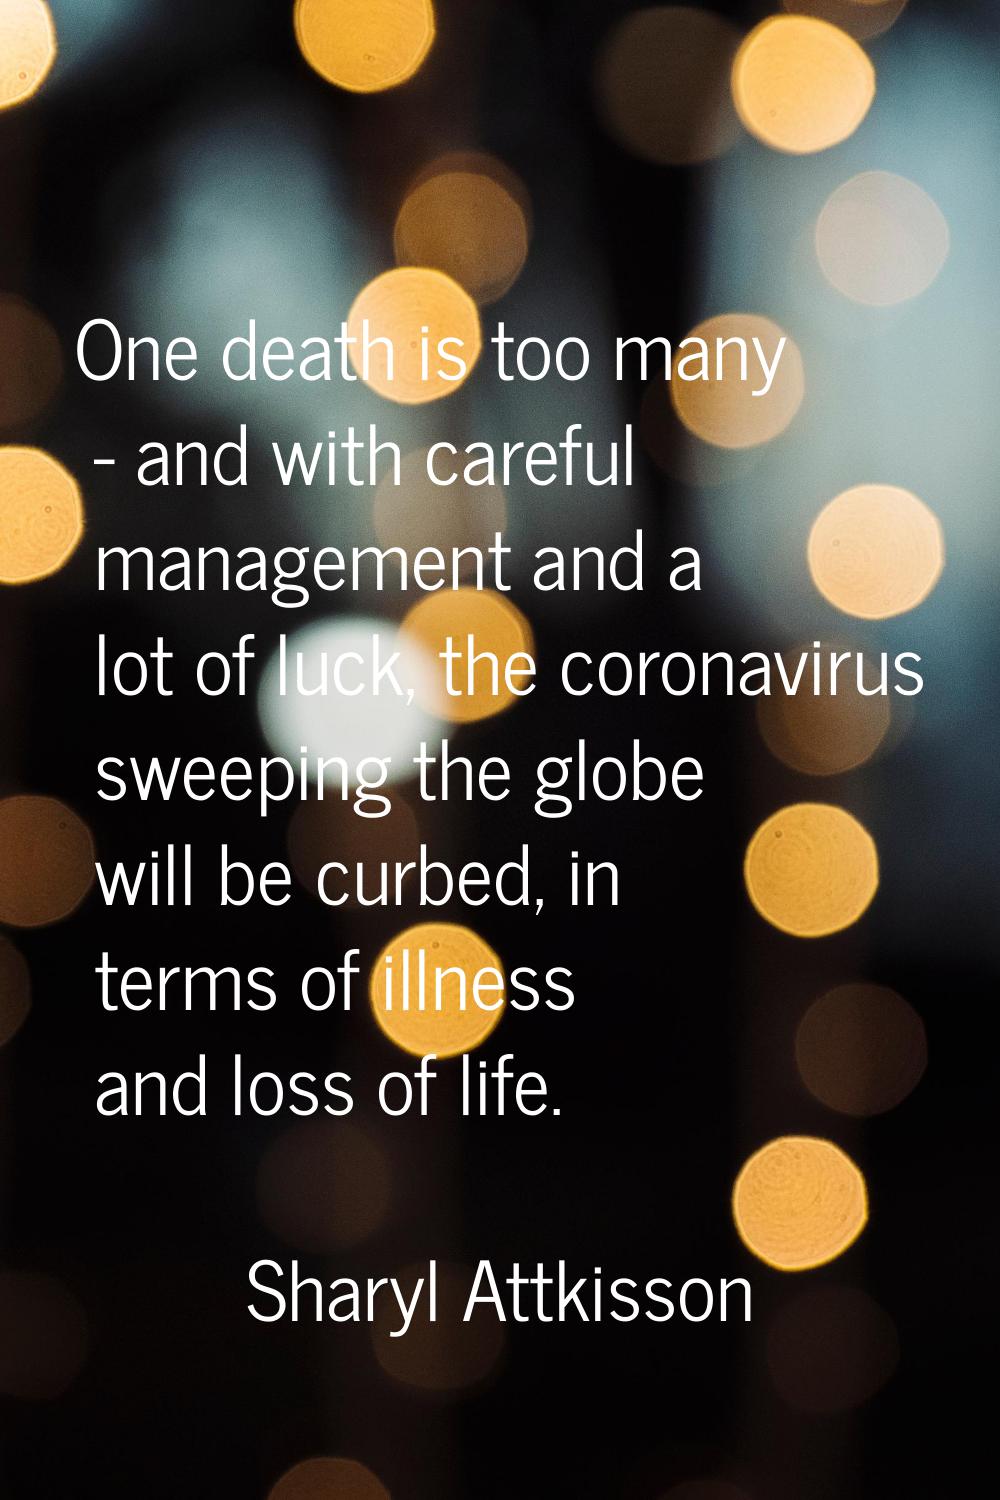 One death is too many - and with careful management and a lot of luck, the coronavirus sweeping the